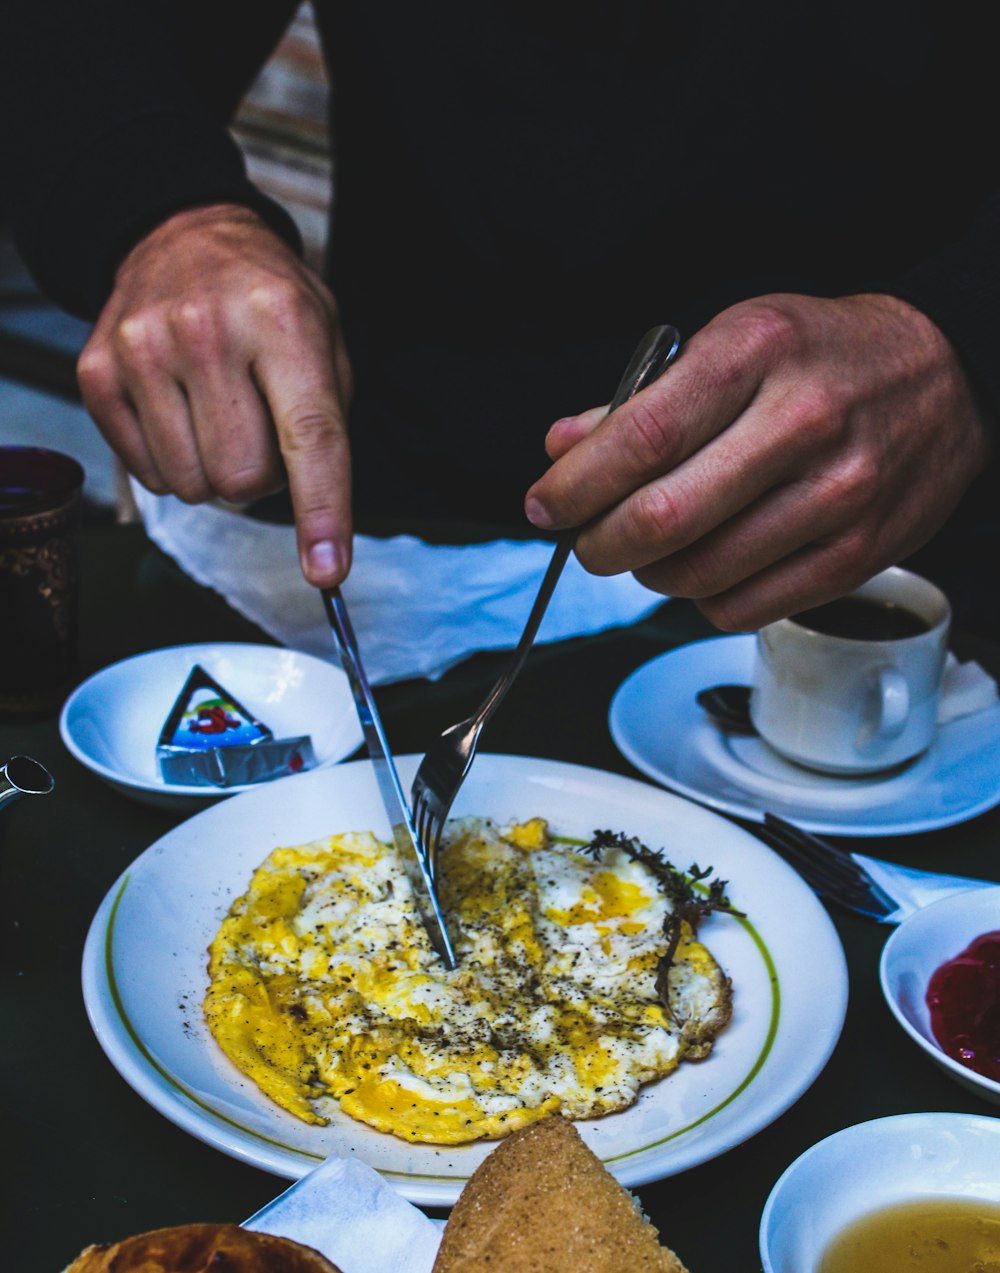 person holding butter knife and fork over cooked egg